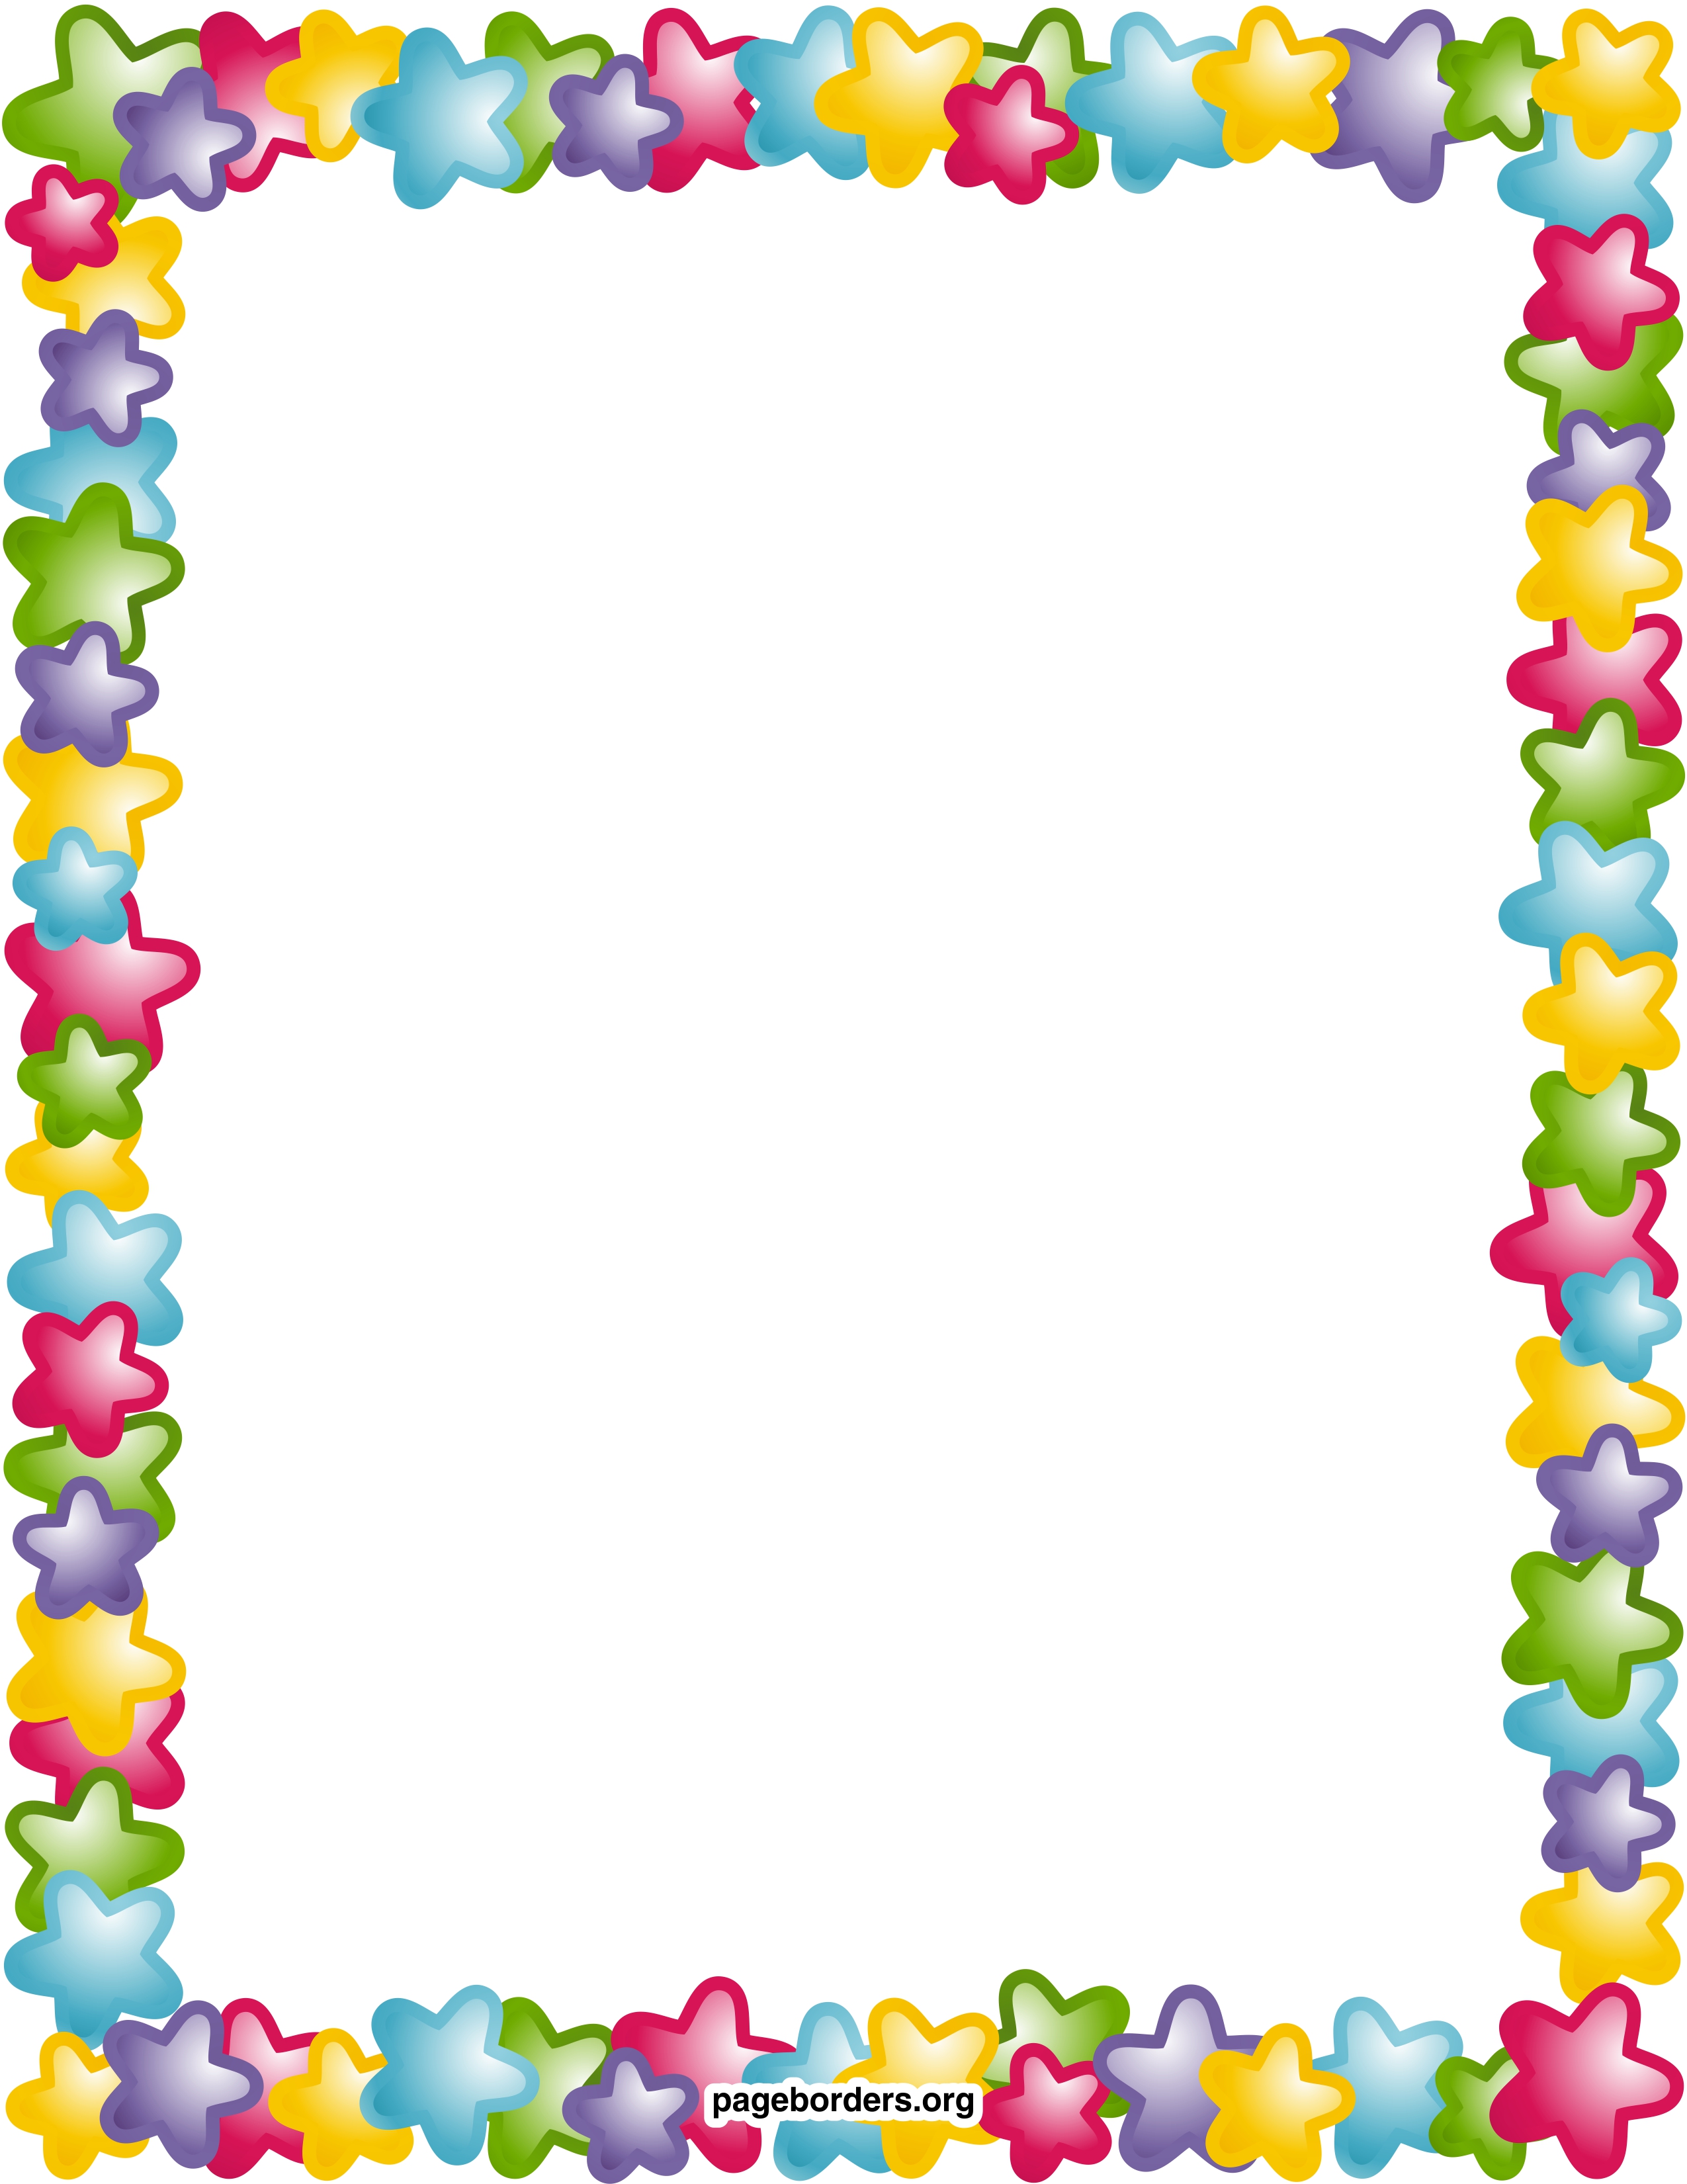 Colorful Star Borders Clipart 